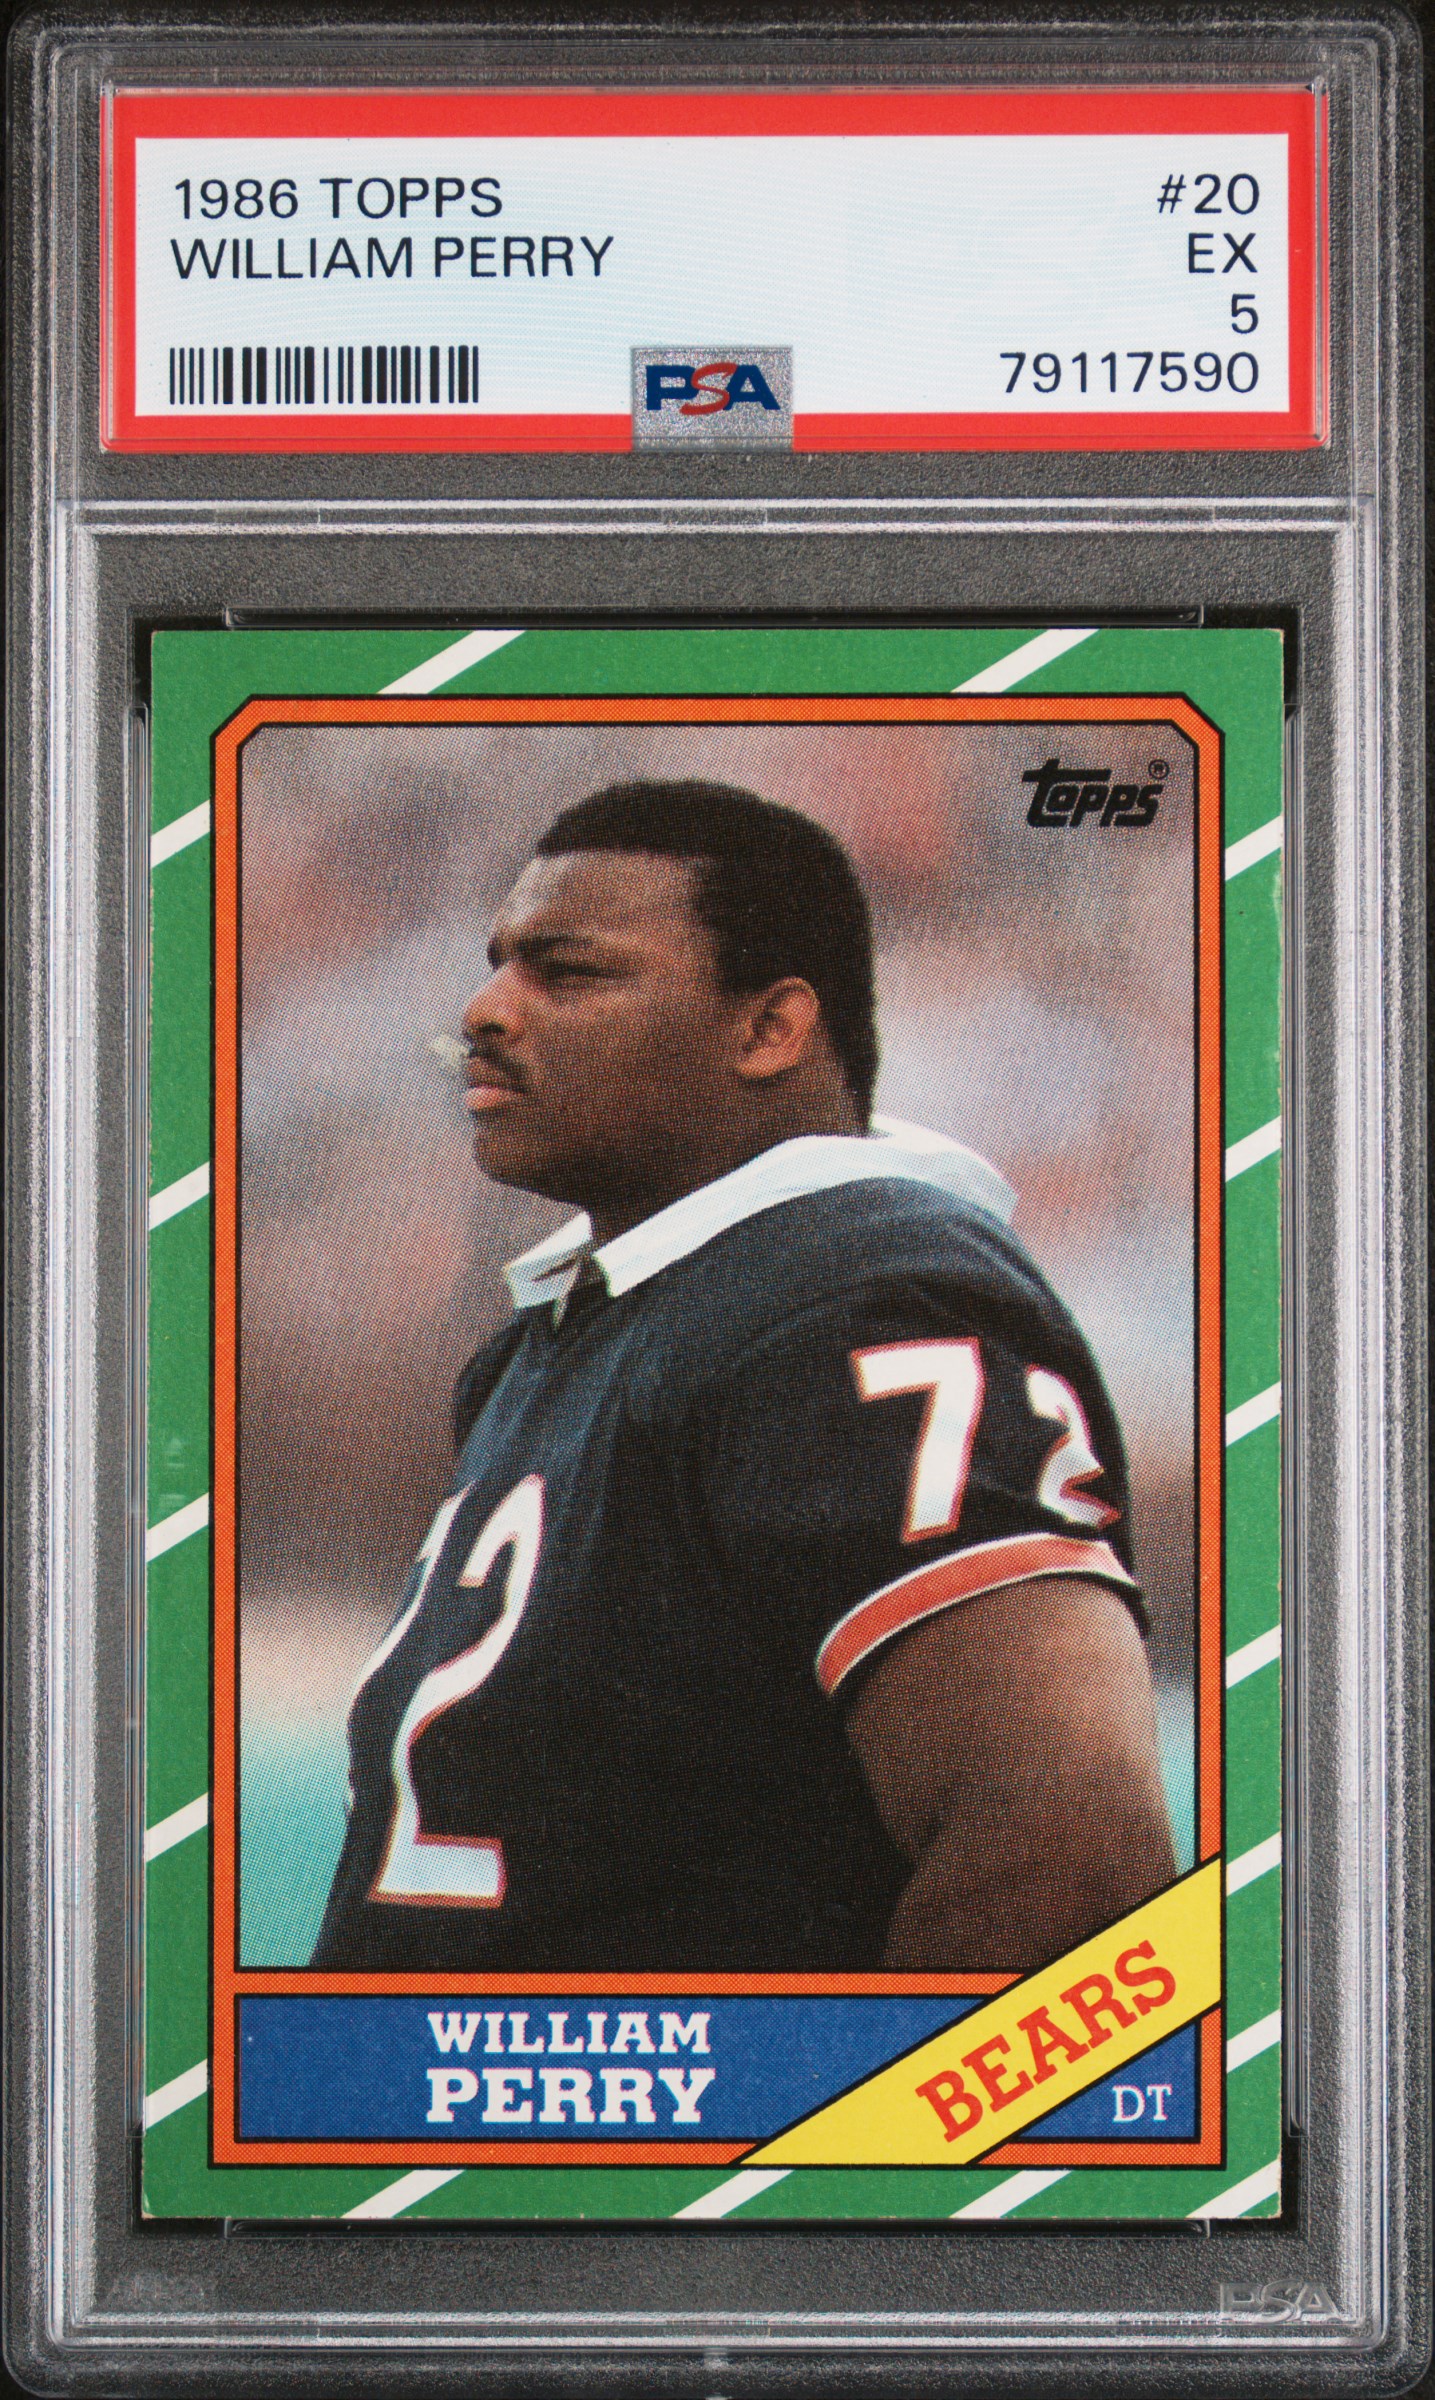 1986 Topps #20 William Perry Rookie Card – PSA EX 5